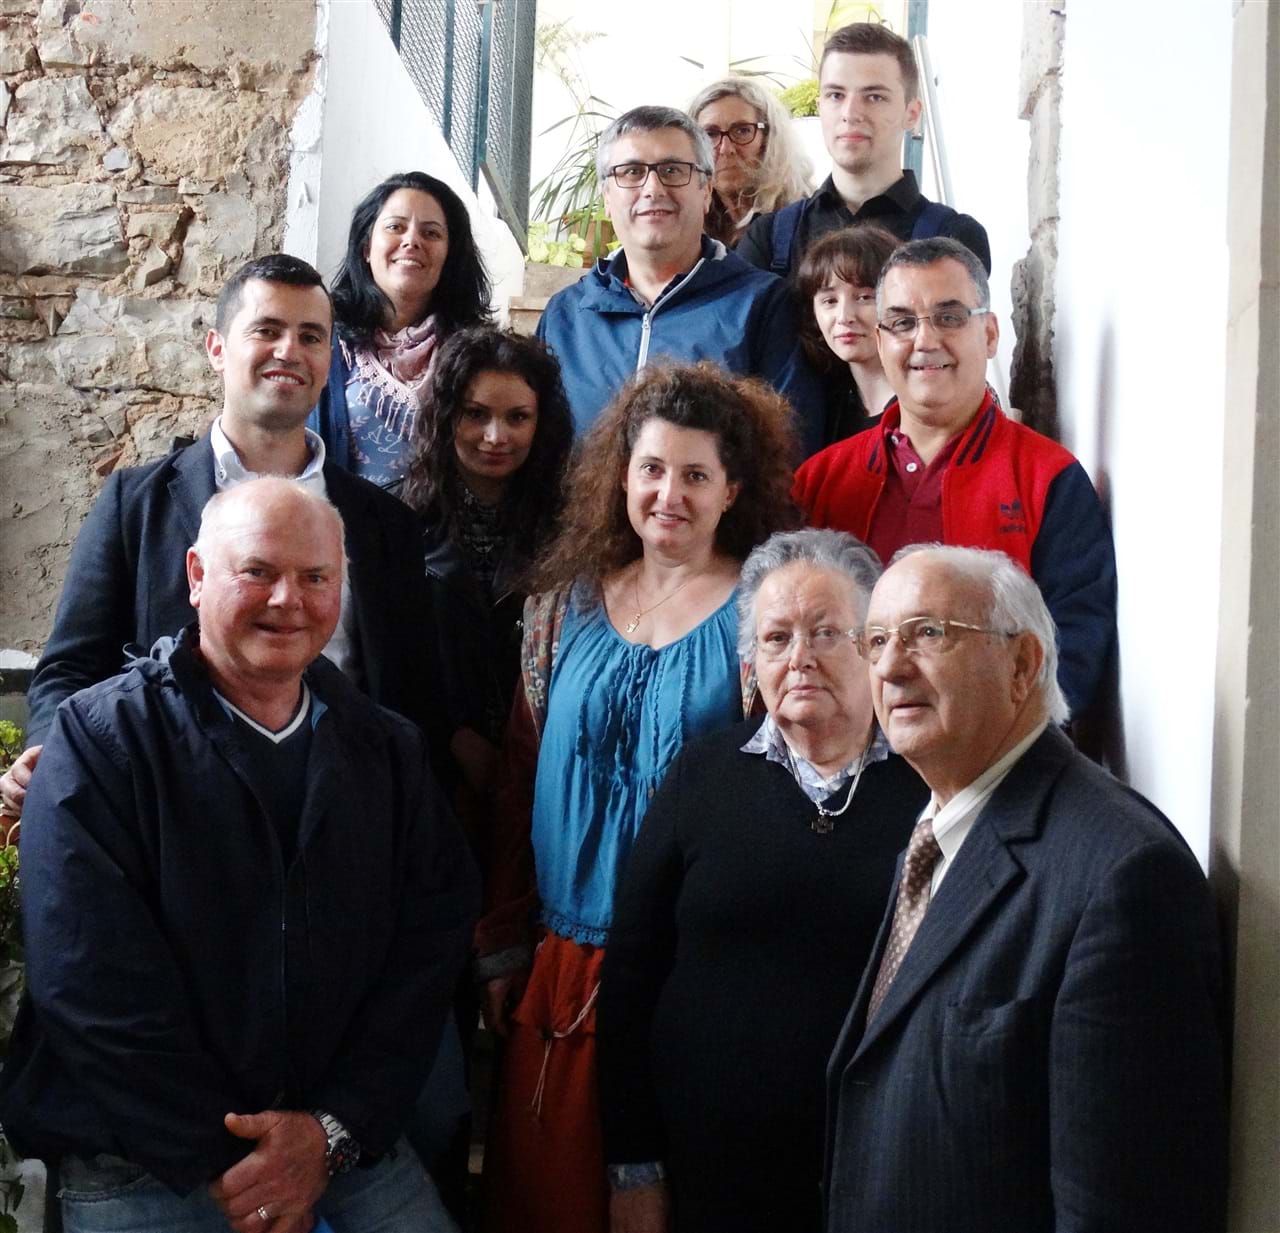 In April 2016 Rotary Club Estoi Palace decided to help a local charit